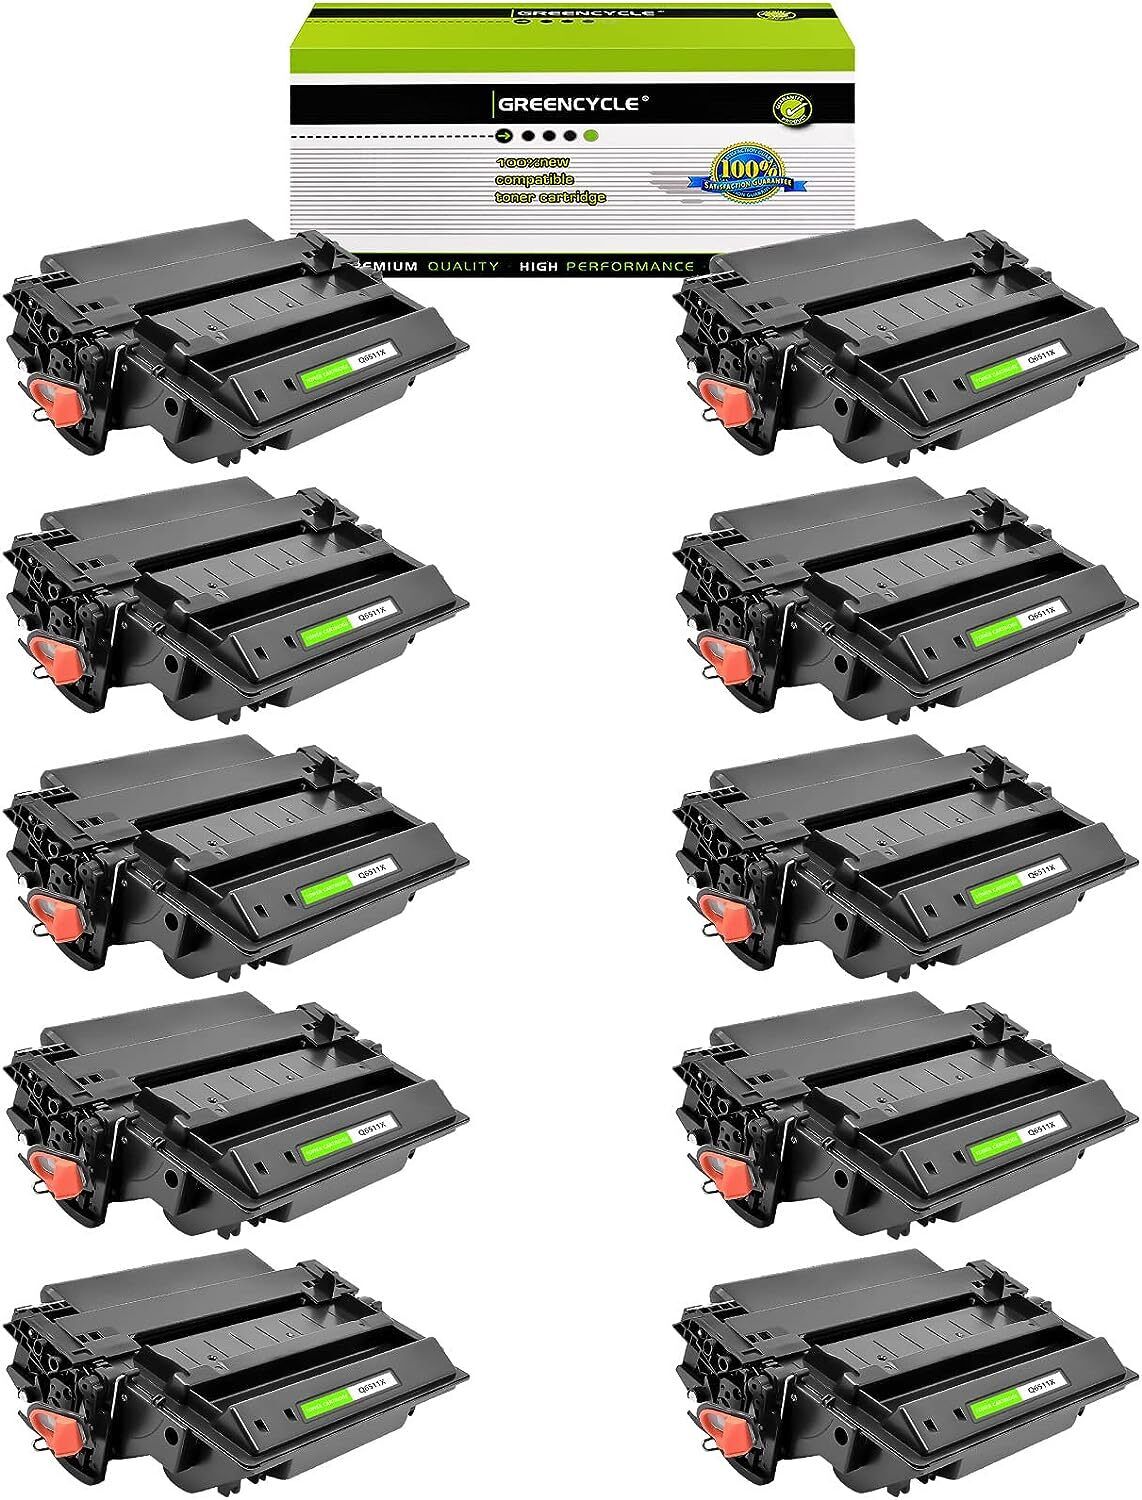 10PK High Yield Greencycle Laser Toner Q6511X fit for HP LaserJet 2420dn/2420dtn